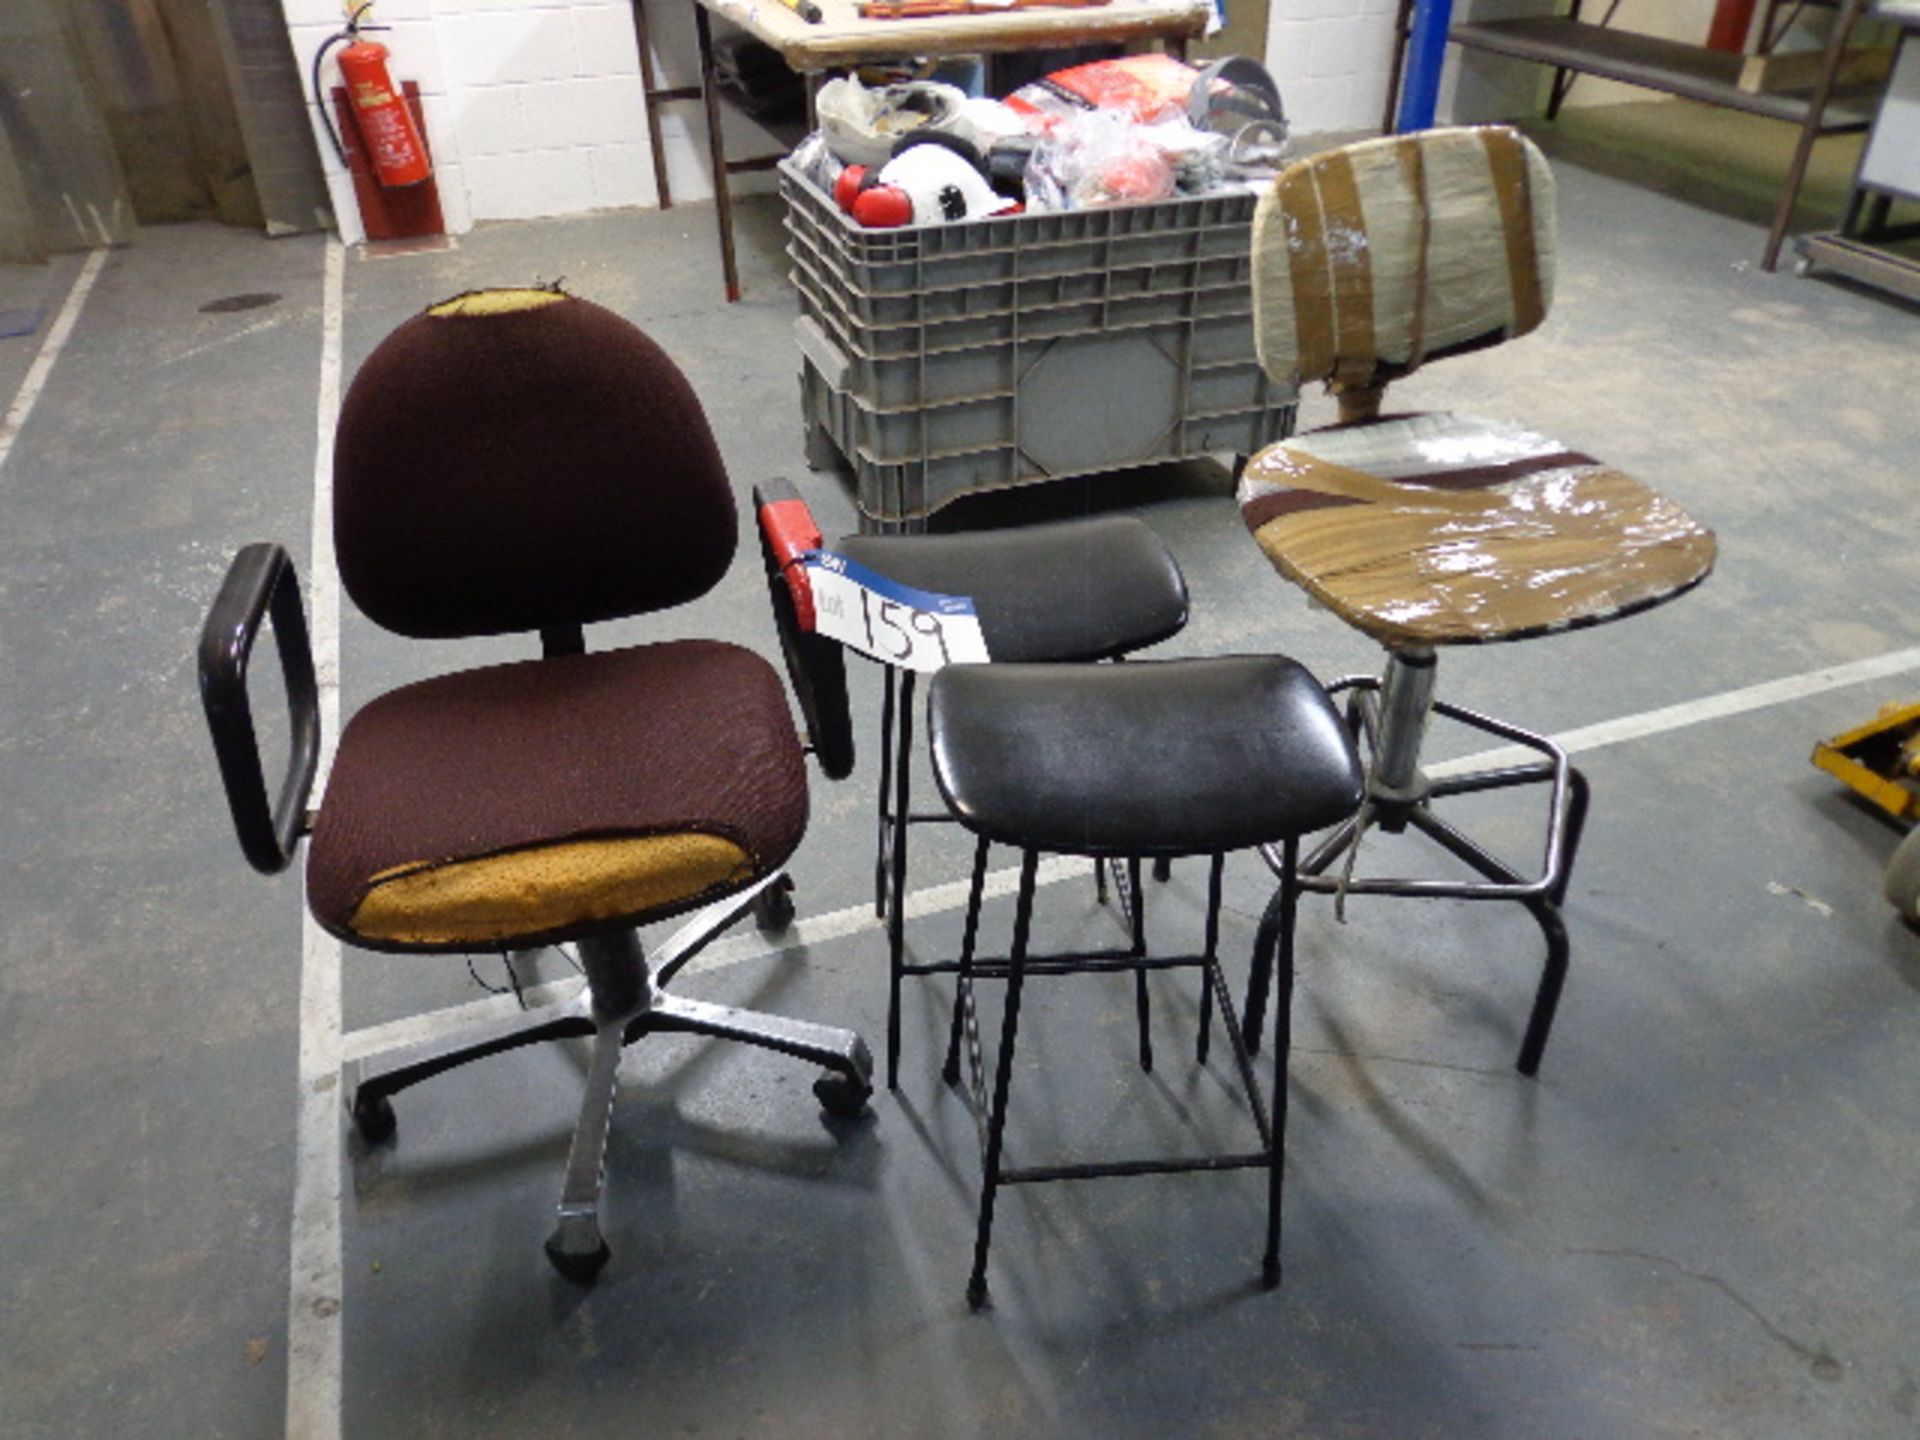 Assorted Chairs & Stools, as set out